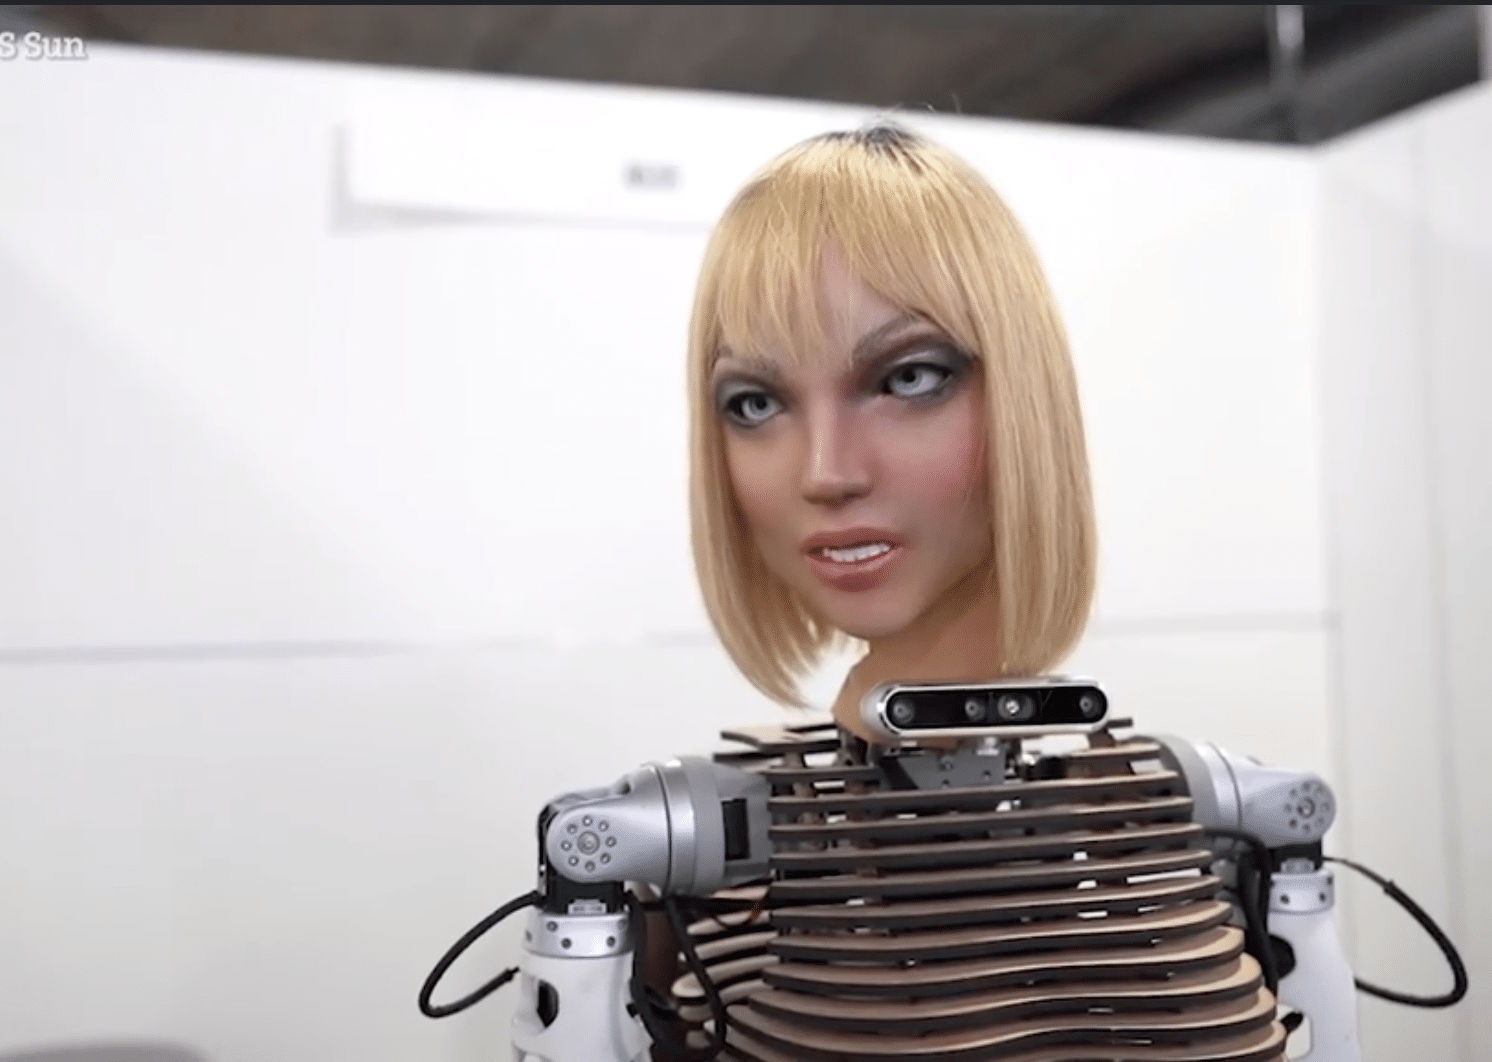 Ultra-realistic AI robot “Xoxe” speaks about the afterlife and the end of the world